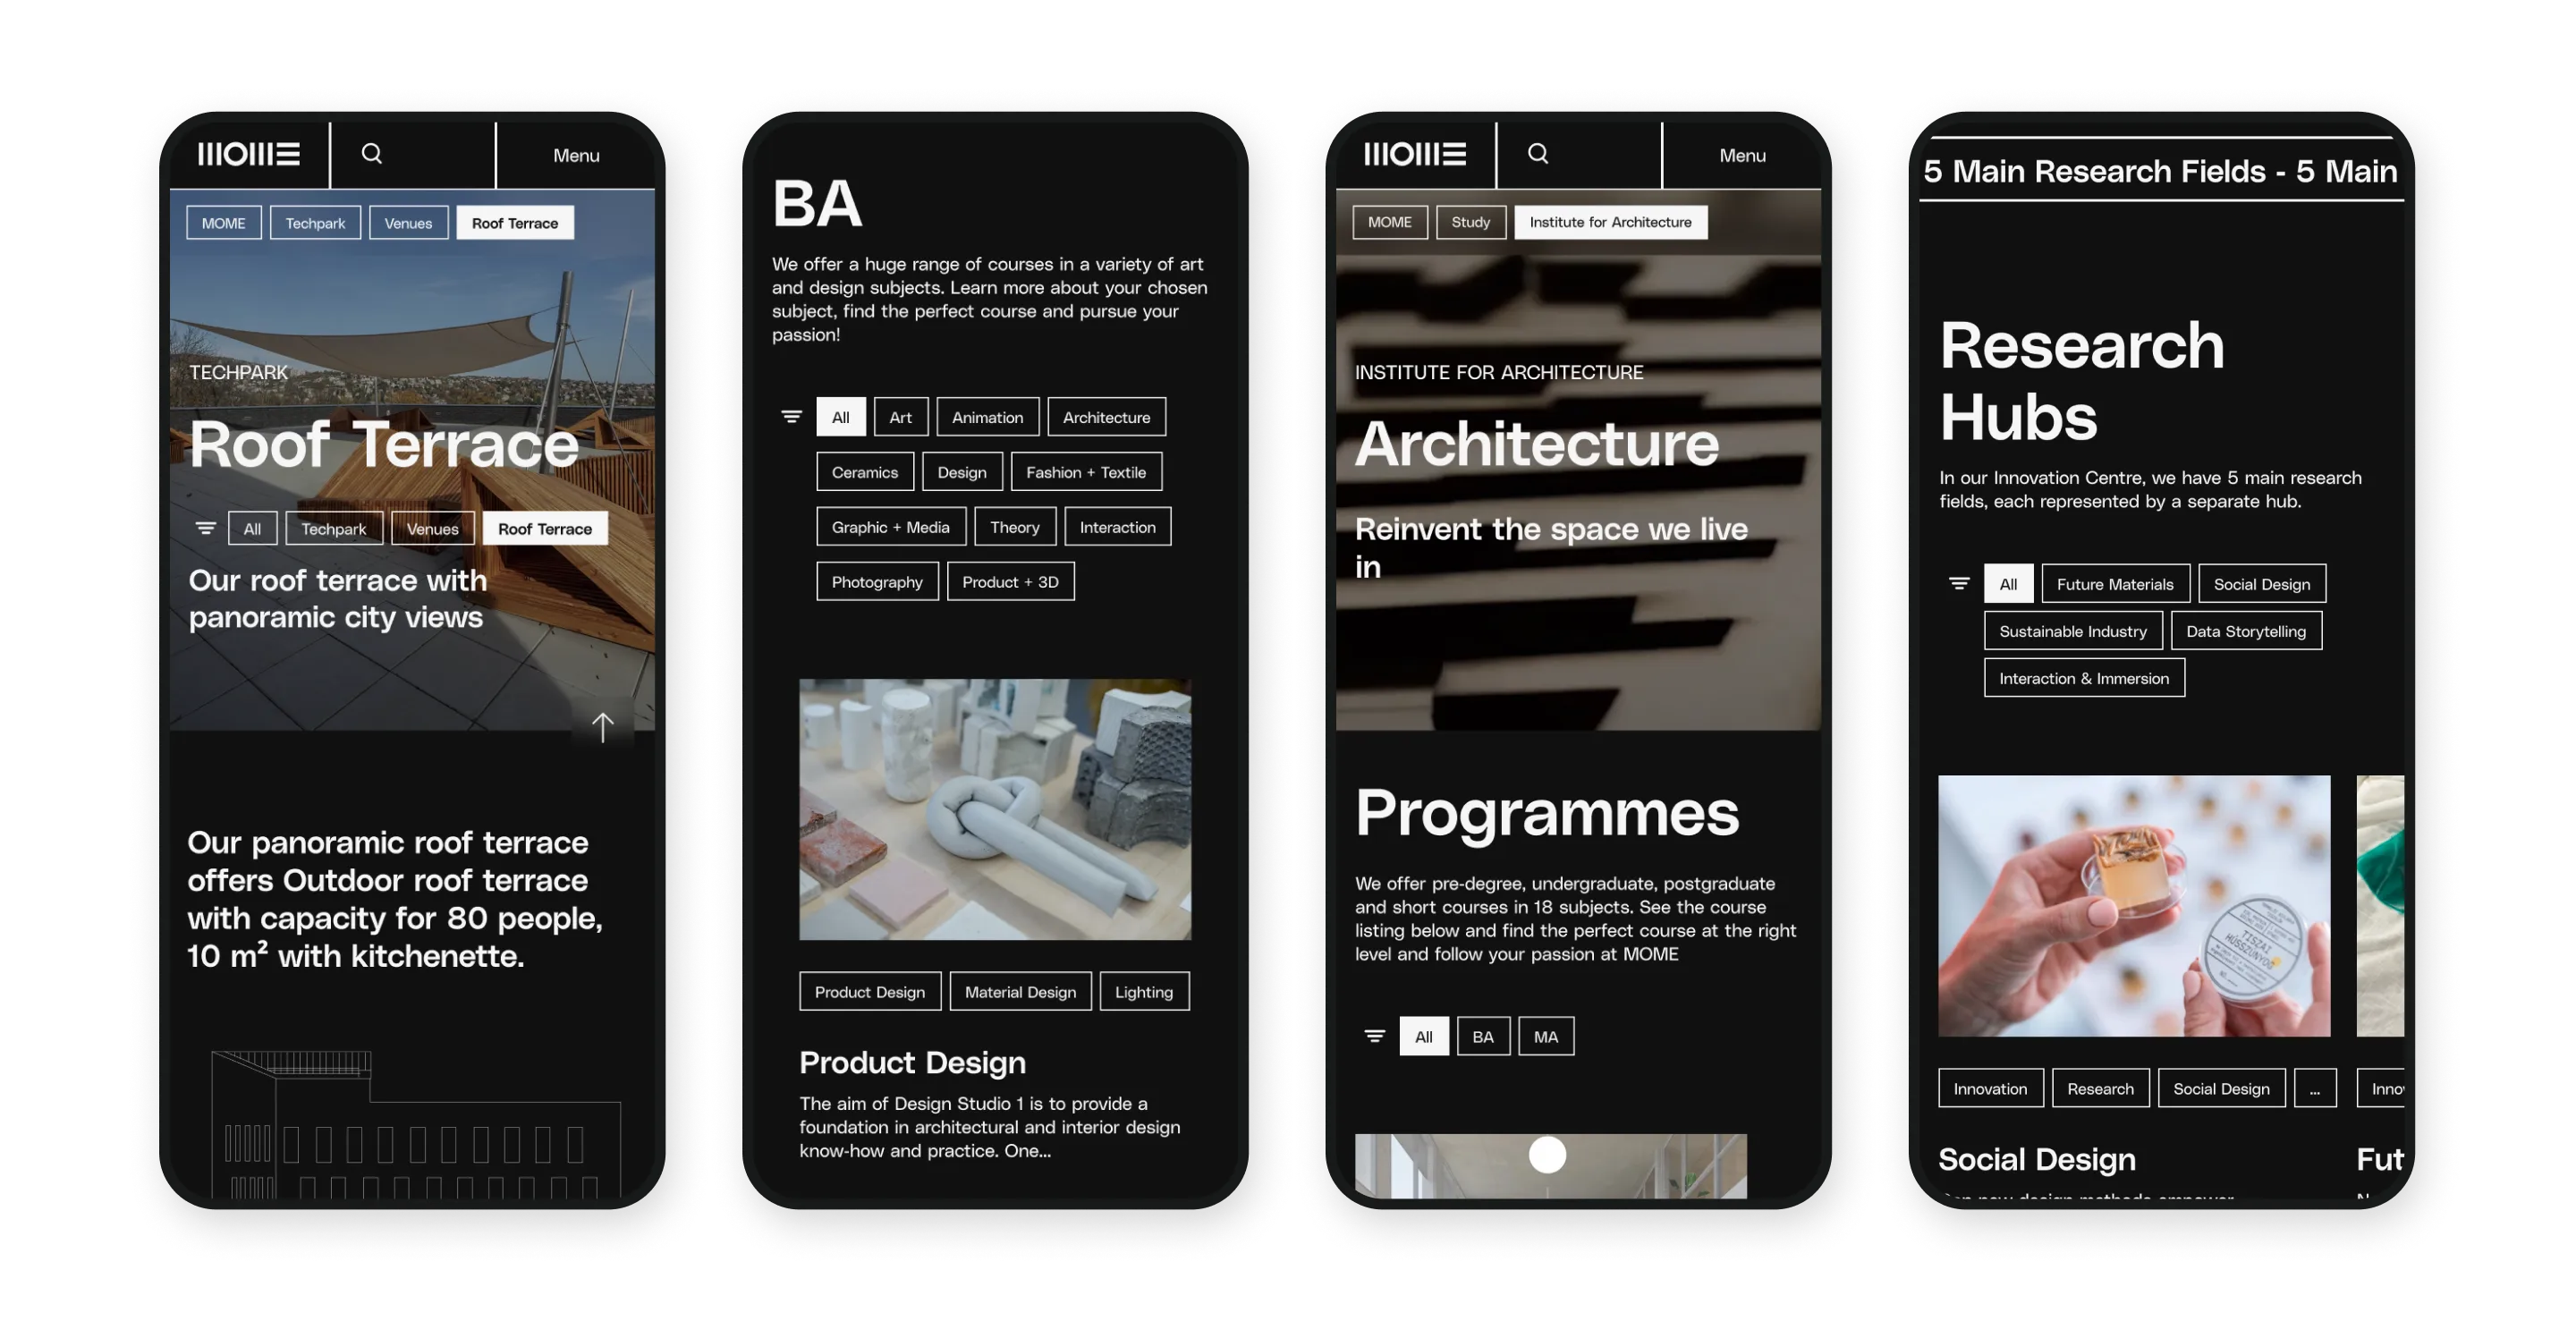 Mobile mockups of different sections on the website such as the Techpak, Masters, Architecture's Programmes and Research Hubs.